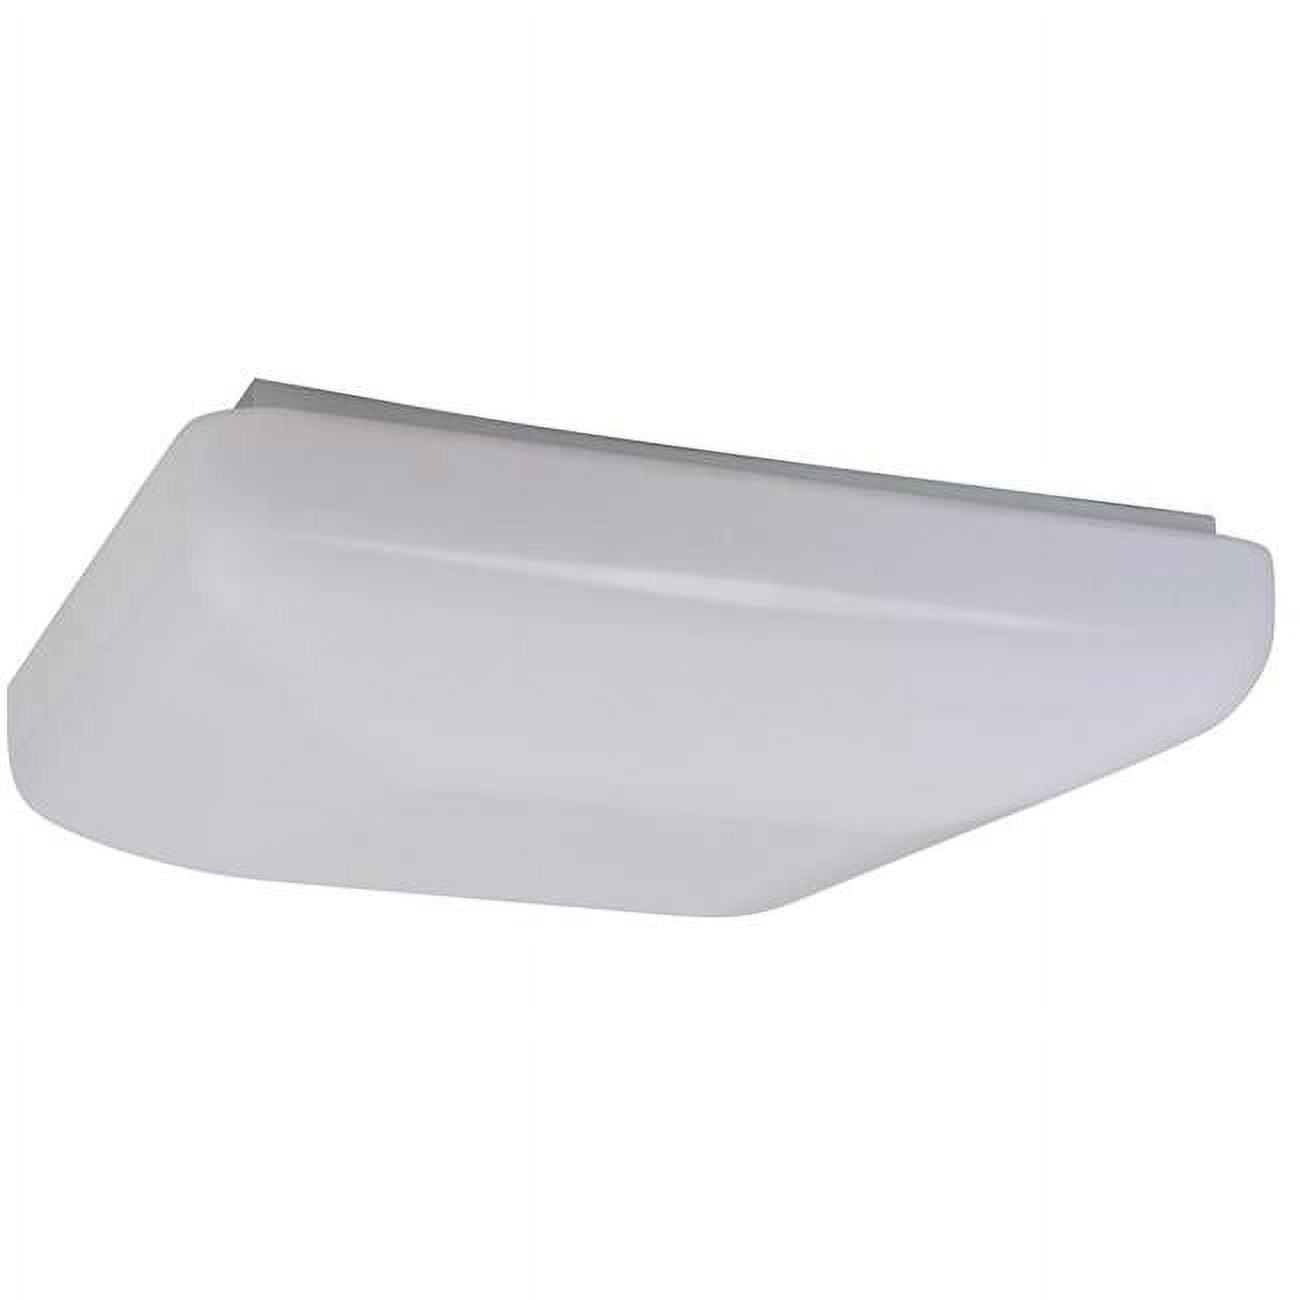 Picture of AMAX Lighting LED-S002L-W 14.5 x 3.5 in. LED Ceiling Fixture Square - White